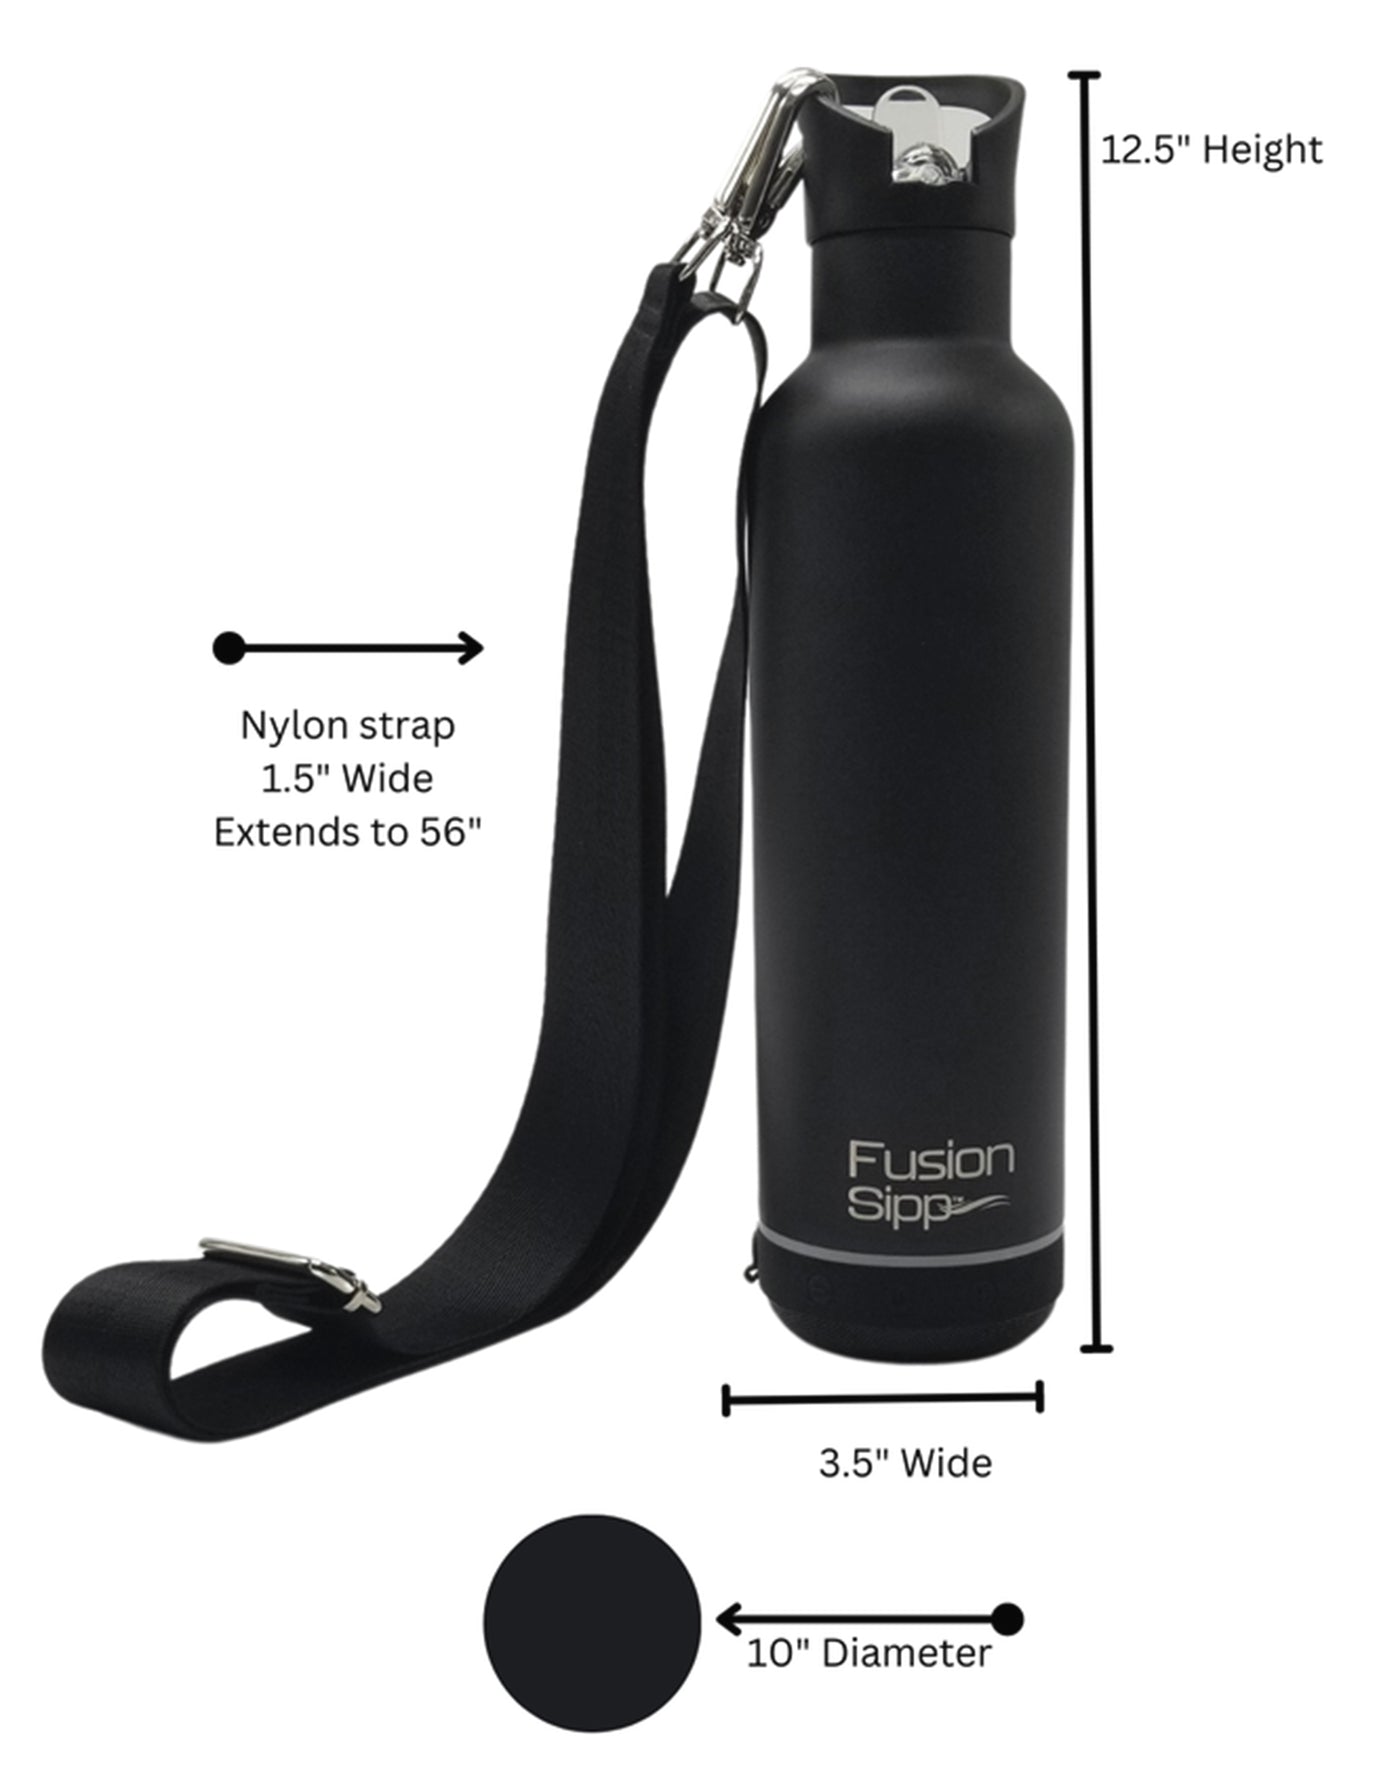 Wu Vacuum Insulated Bottle with Built-In Bluetooth Speaker